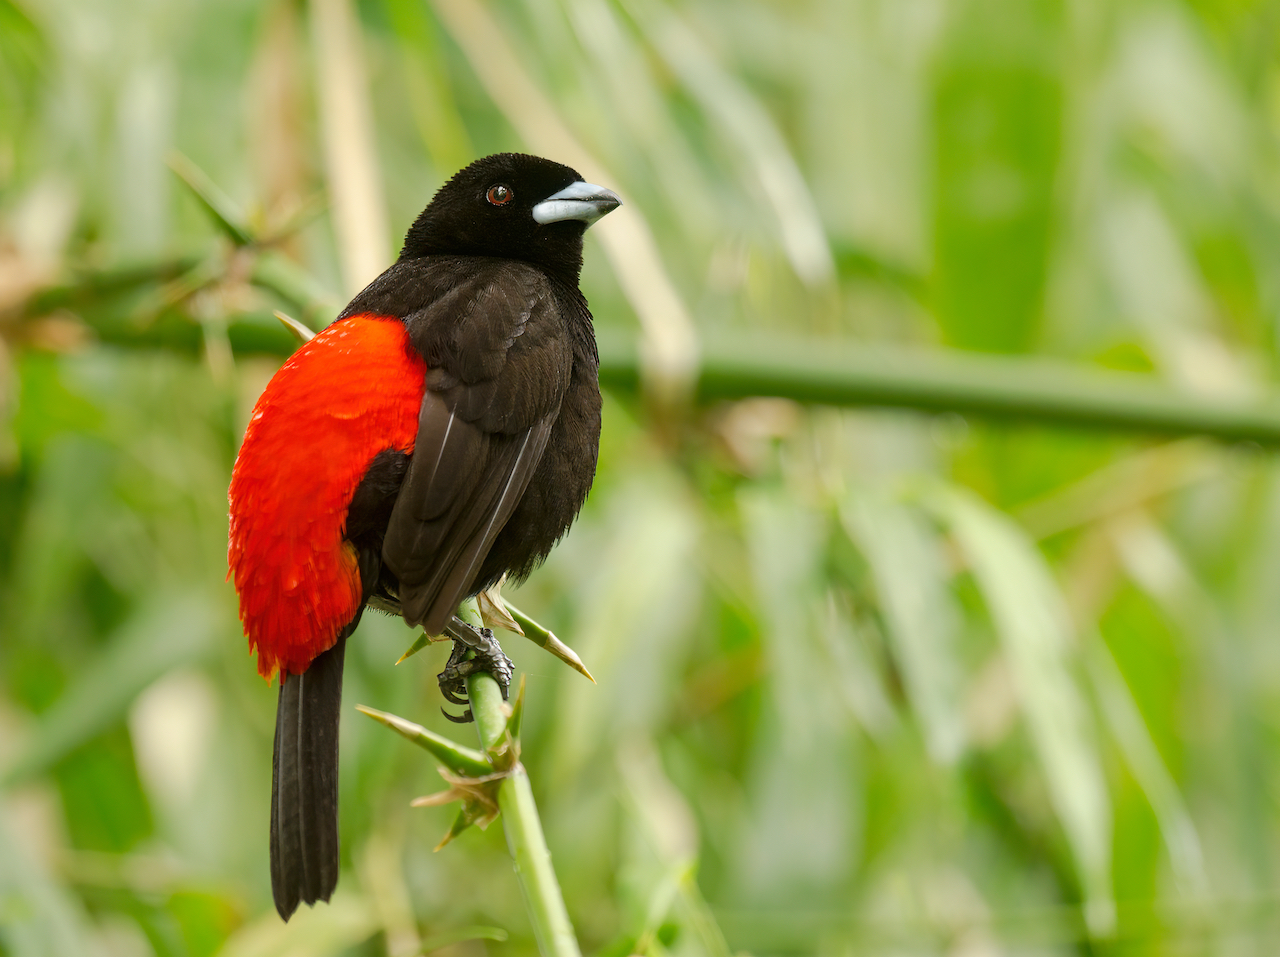 Carara National Park: one of the most important sites for birdwatching   Costa Rica.